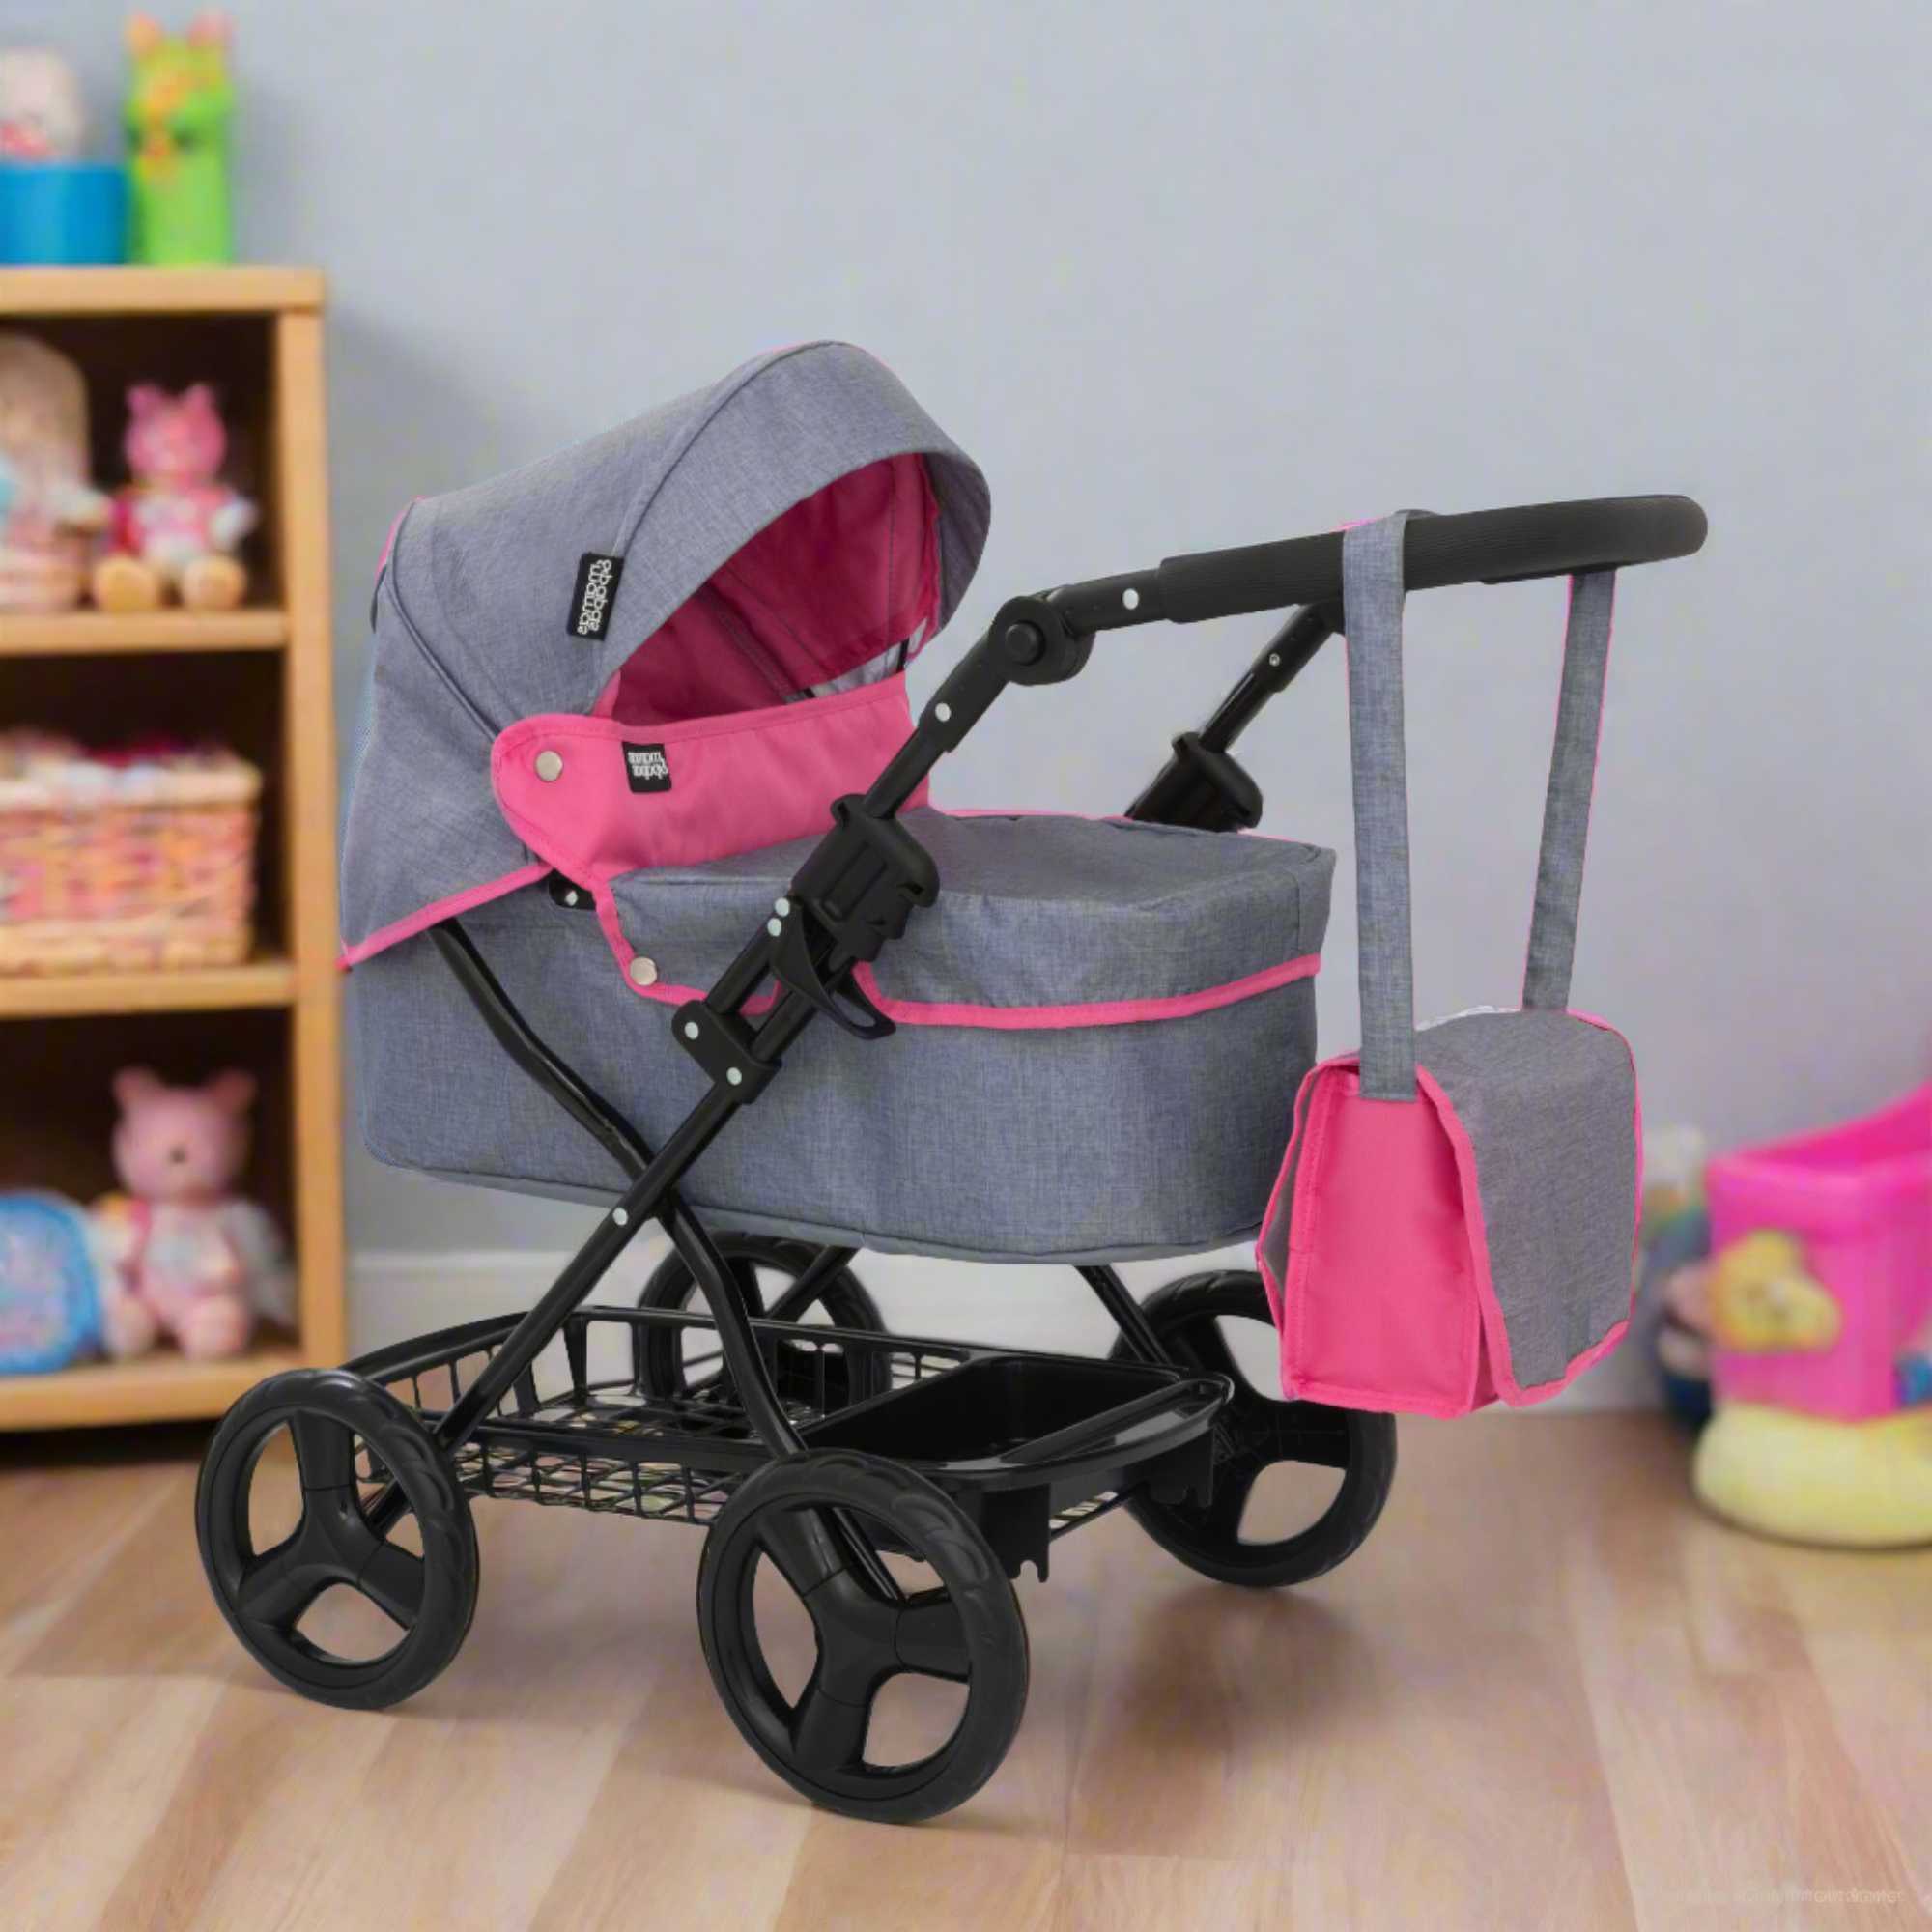 Mamas & Papas Junior Ultima Dolls Pram, designed for children's play, featuring a classic and sturdy frame, adjustable handle height, and smooth-rolling wheels, ideal for nurturing imaginative play with dolls.